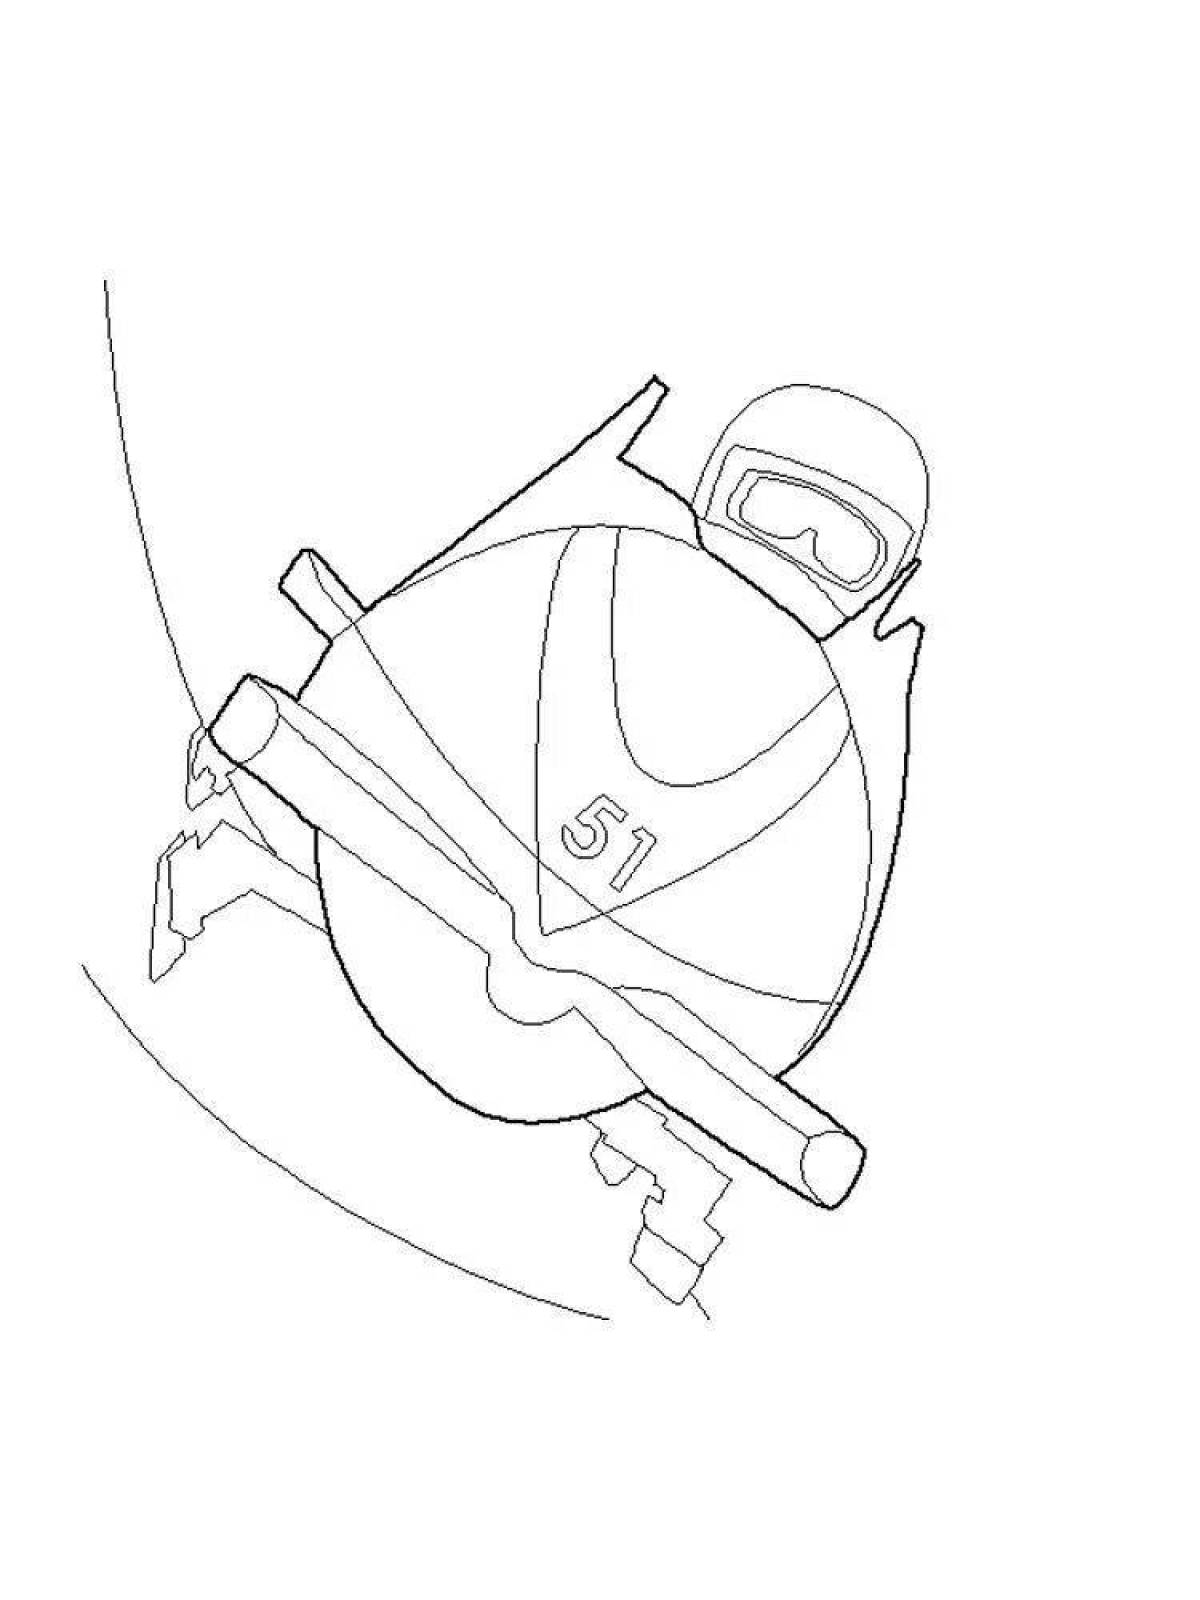 Playful bobsleigh coloring page